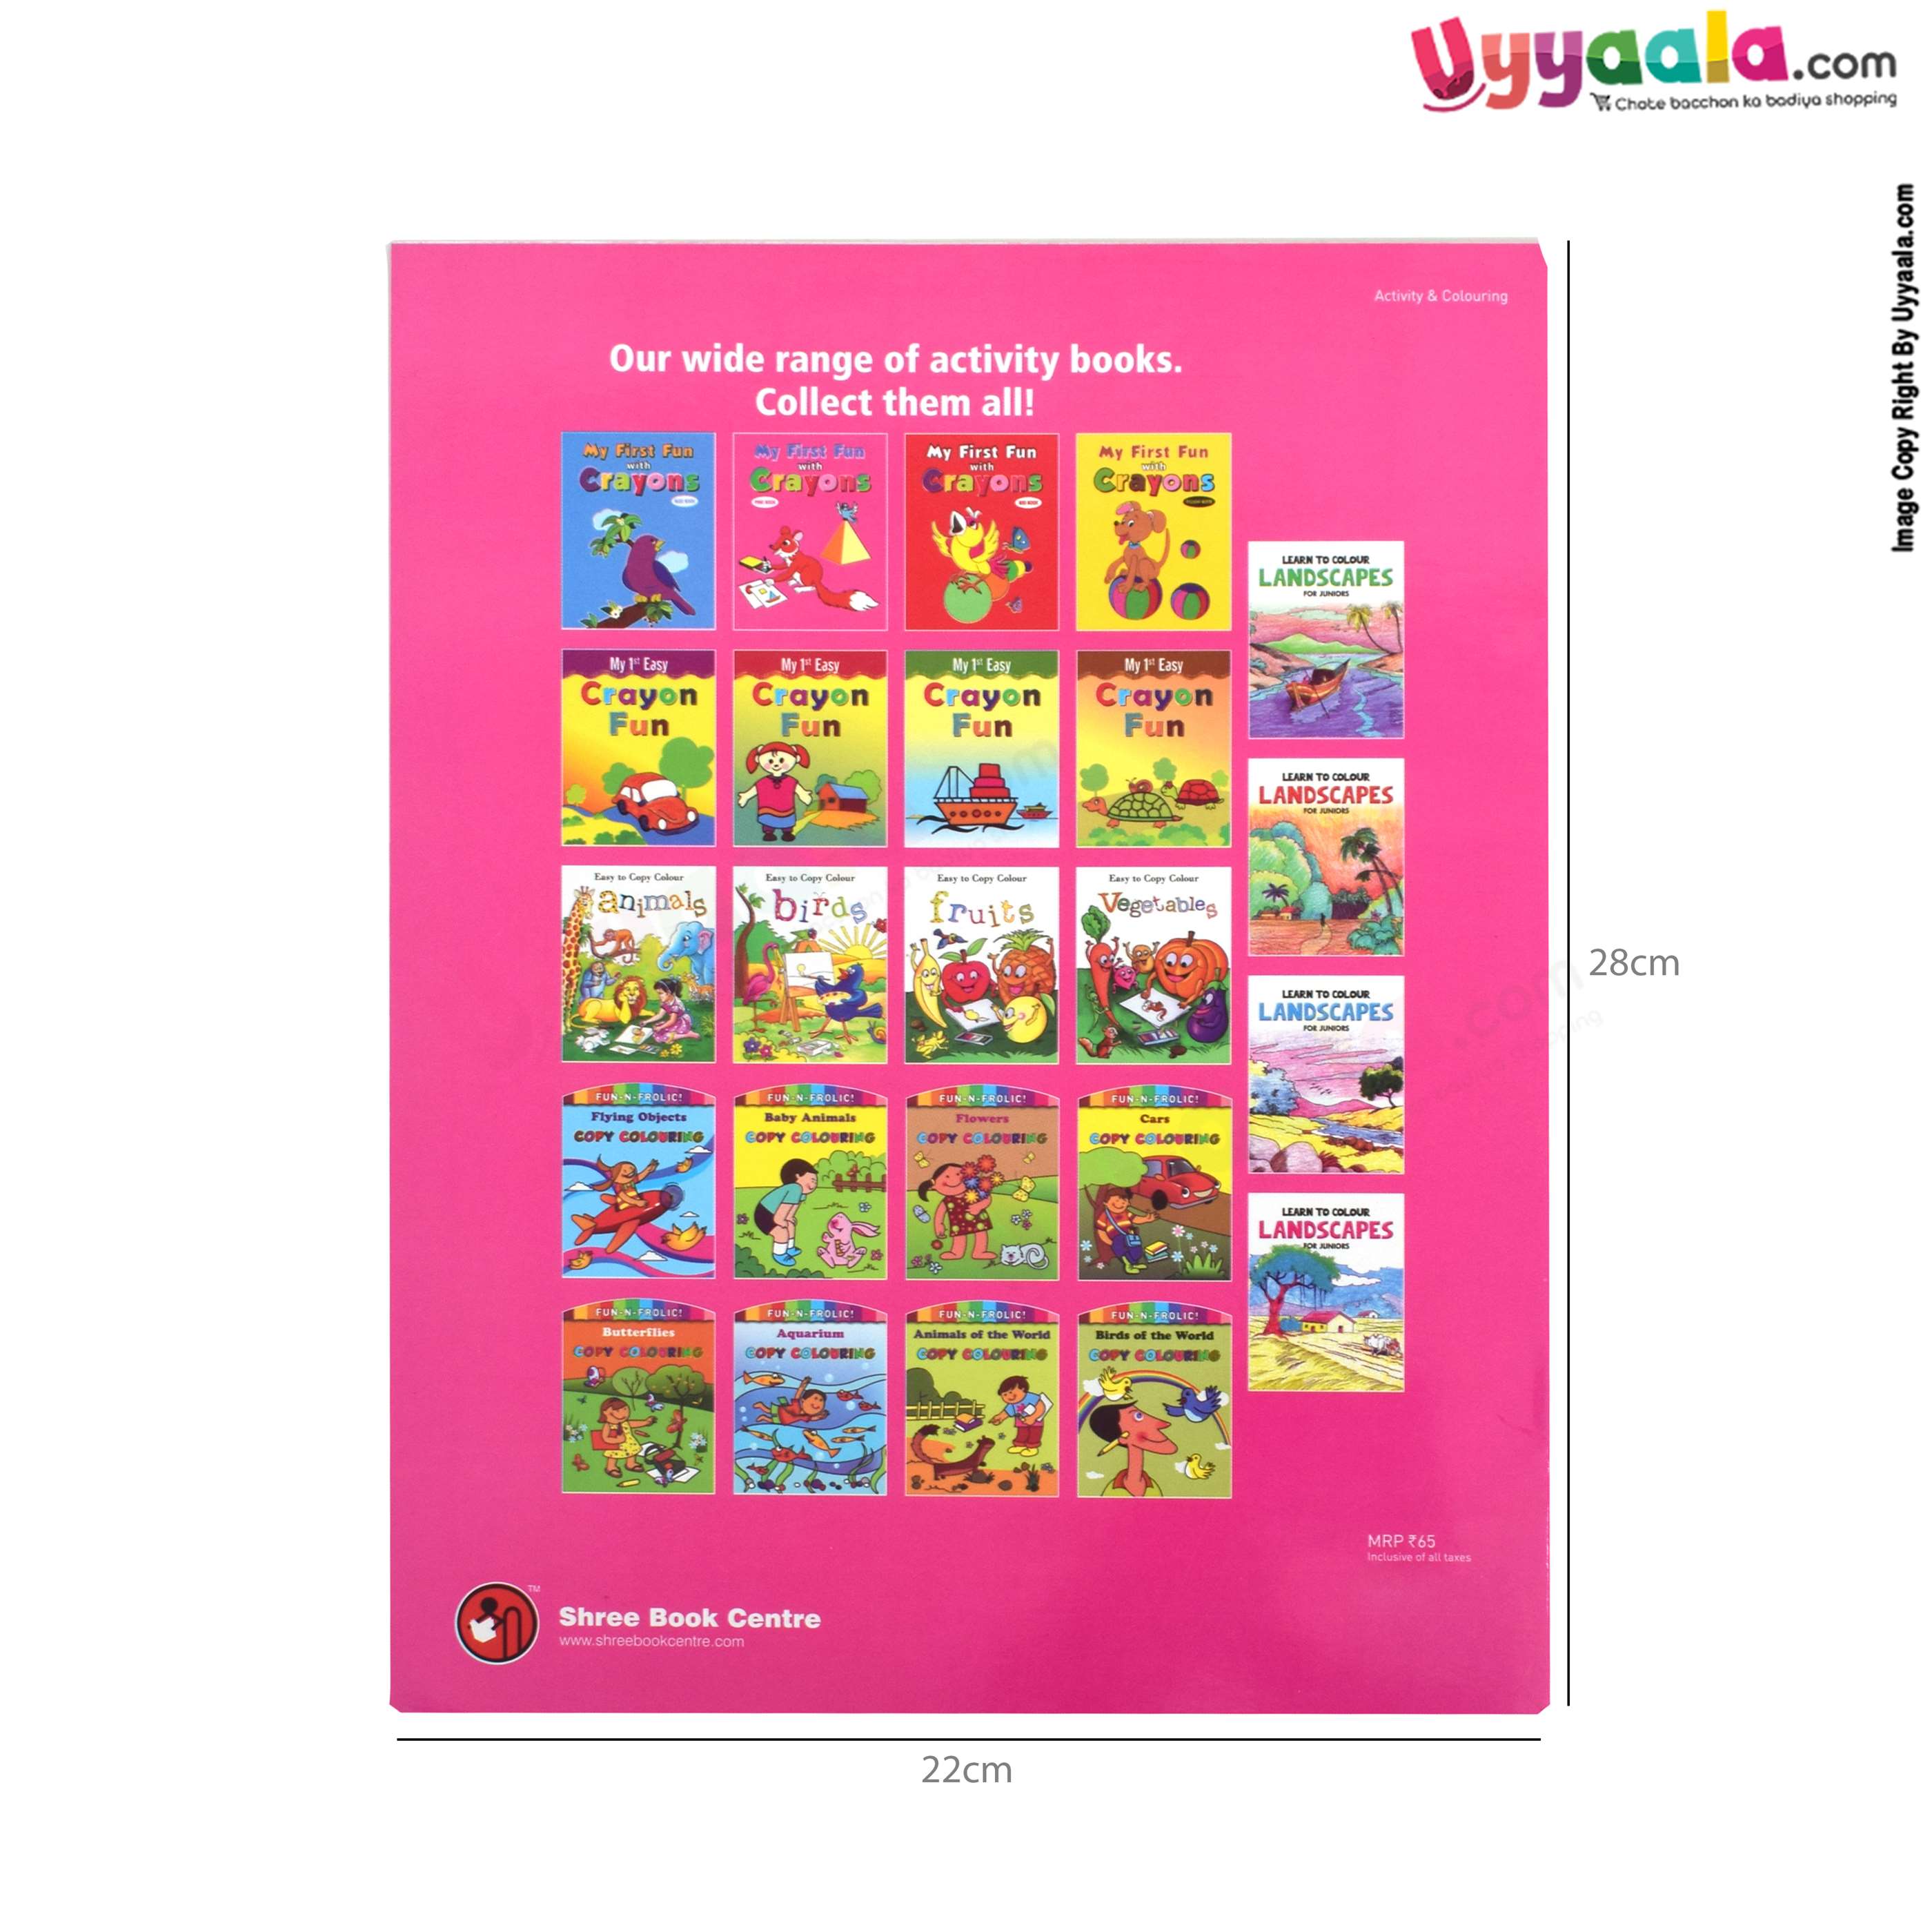 My first fun with crayons, pink book - fun activity books, 2 - 6 years